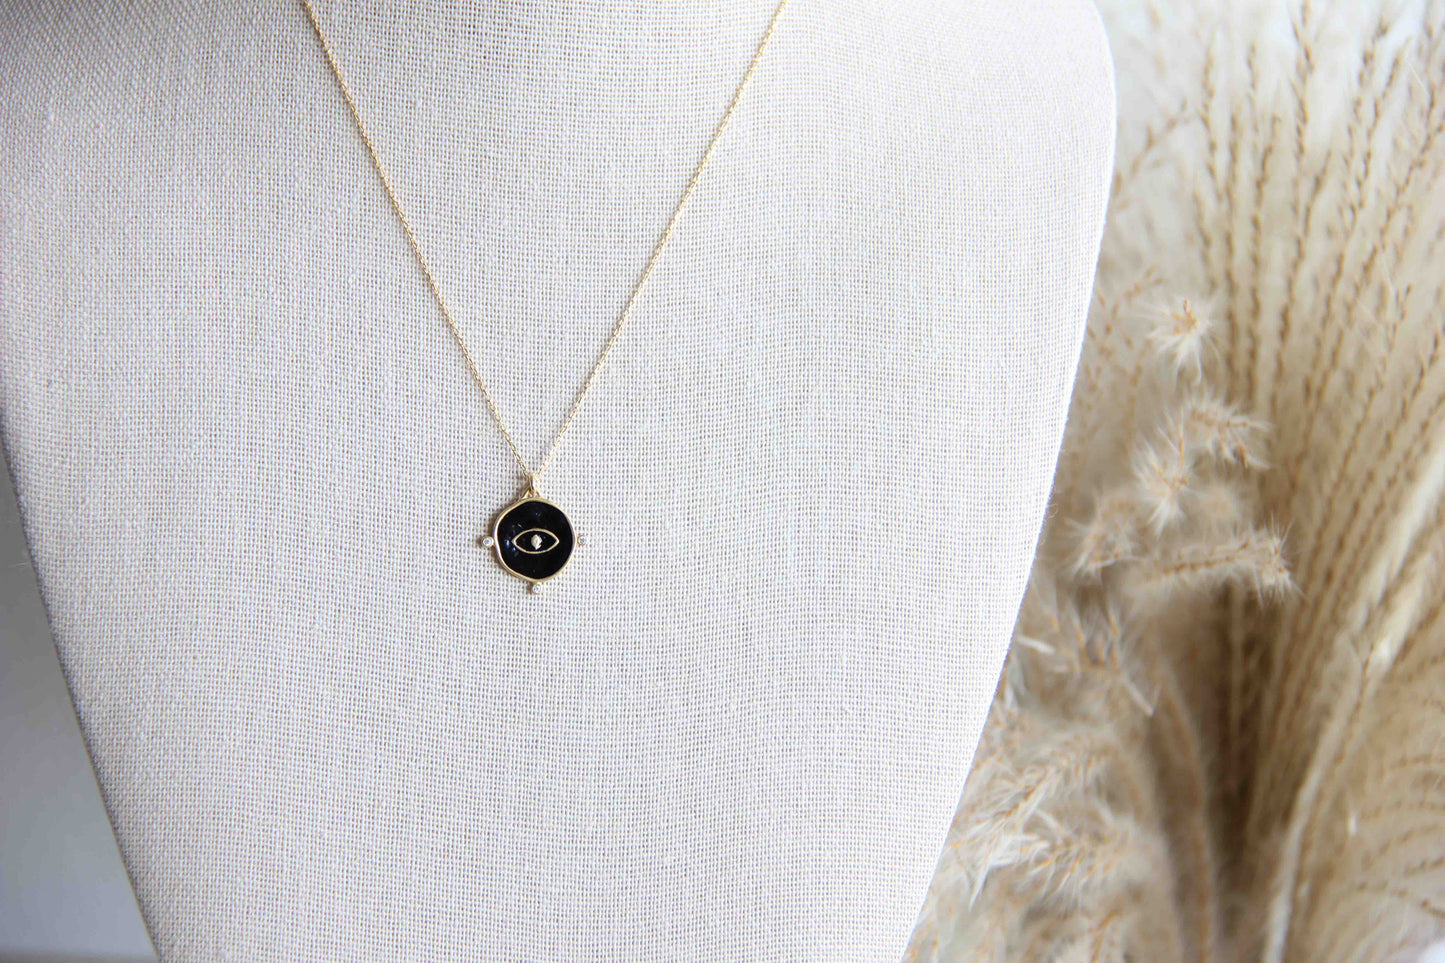 This gorgeous minimal gold evil eye necklace are made with 18k Gold Plated on solid 925 sterling silver and has 3 mini cubic zirconias around the charm. 